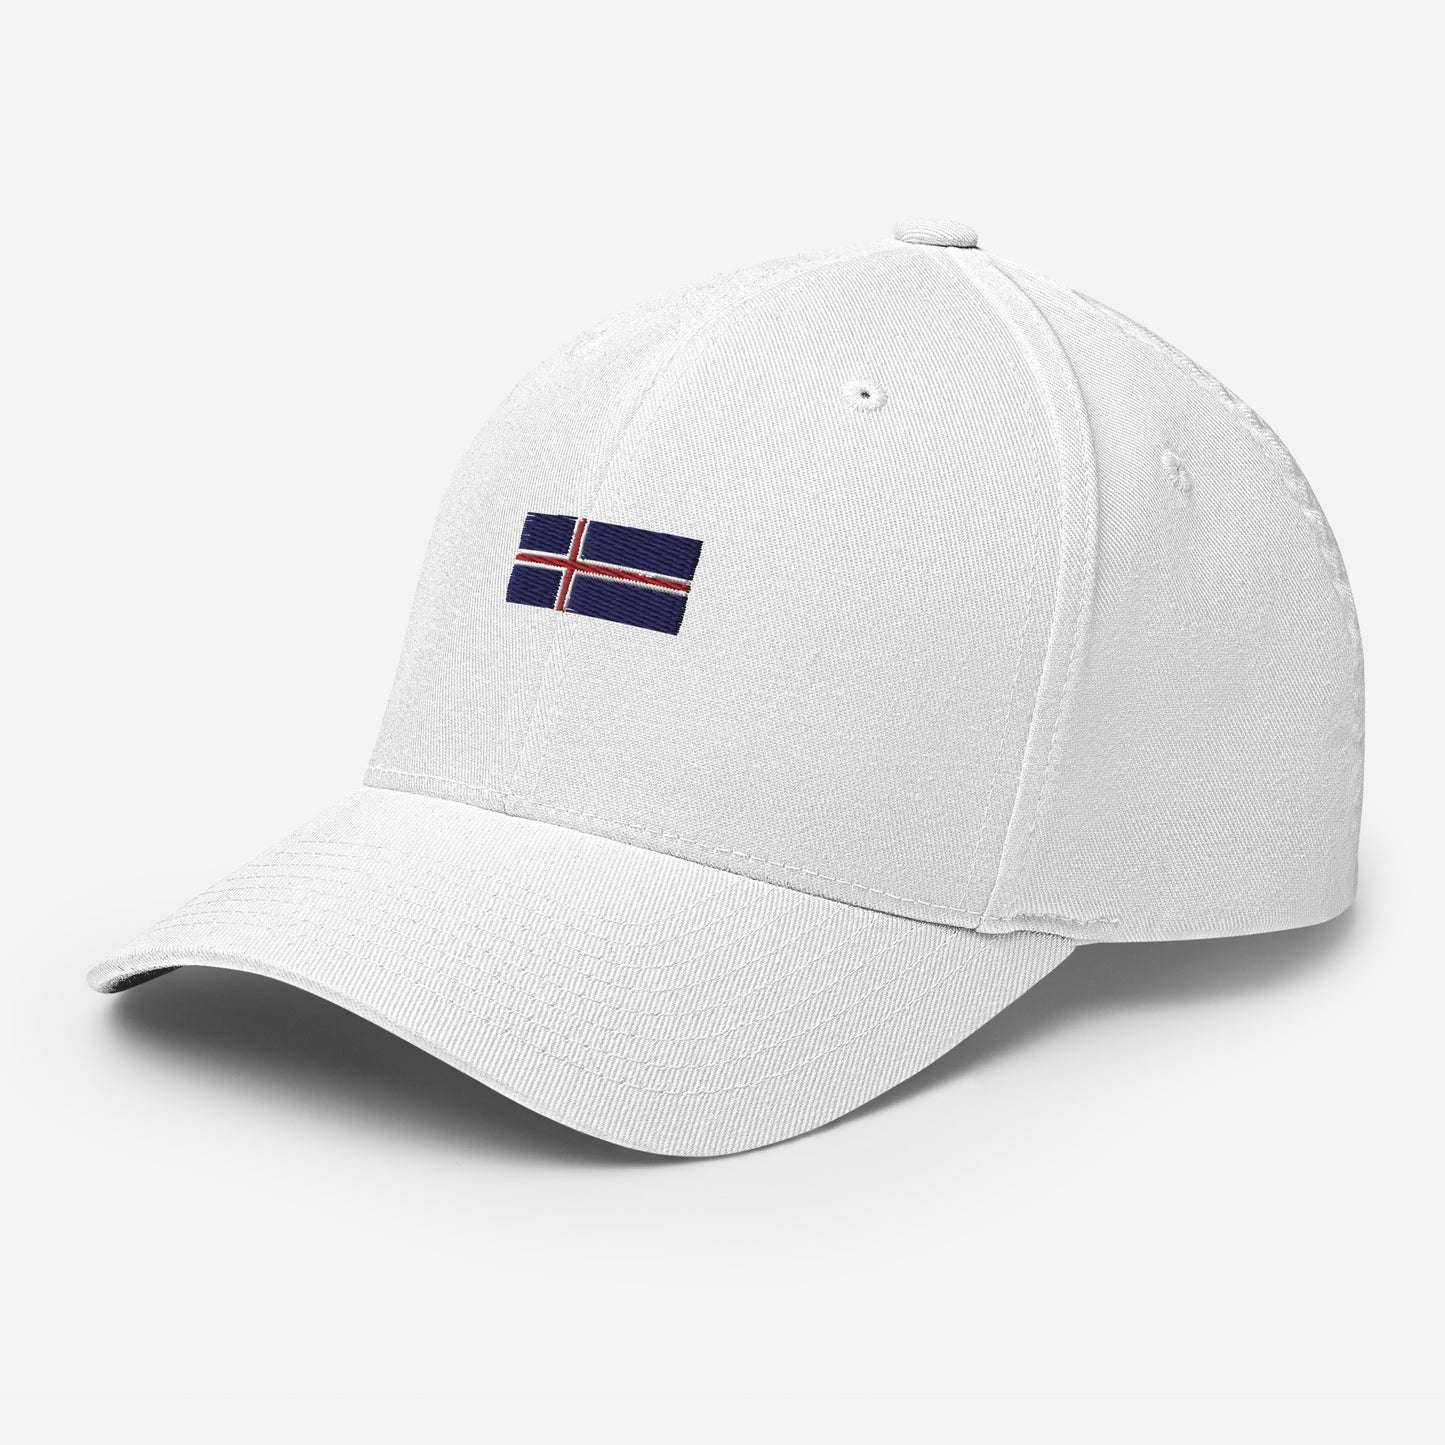 cap-from-the-front-with-icelandic-flag